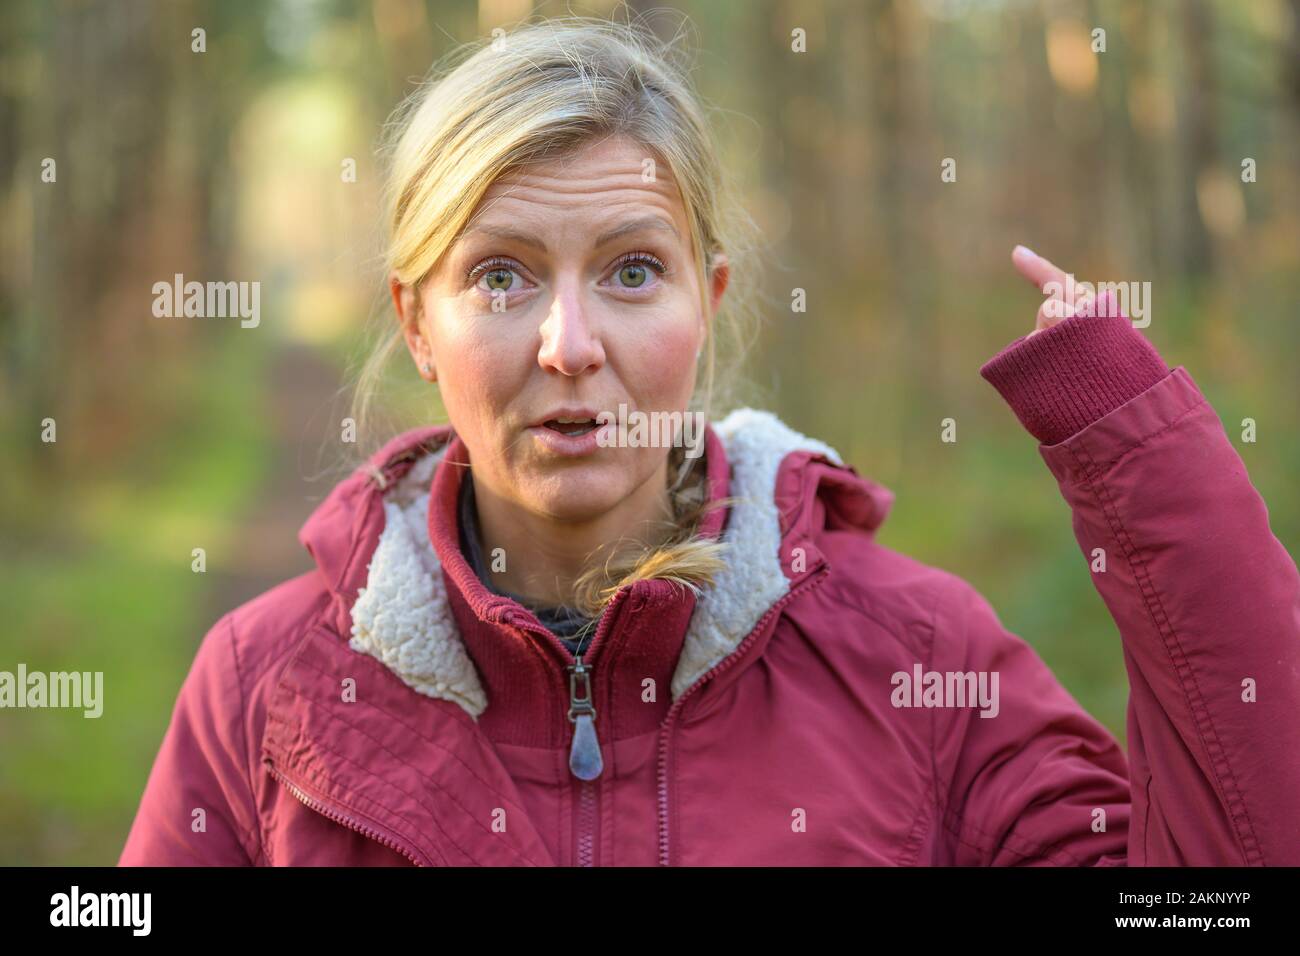 Blond woman in red jacket showing up her long sleeve hiding the hand almost entirely, standing outdoors in the forest and looking at camera with surpr Stock Photo